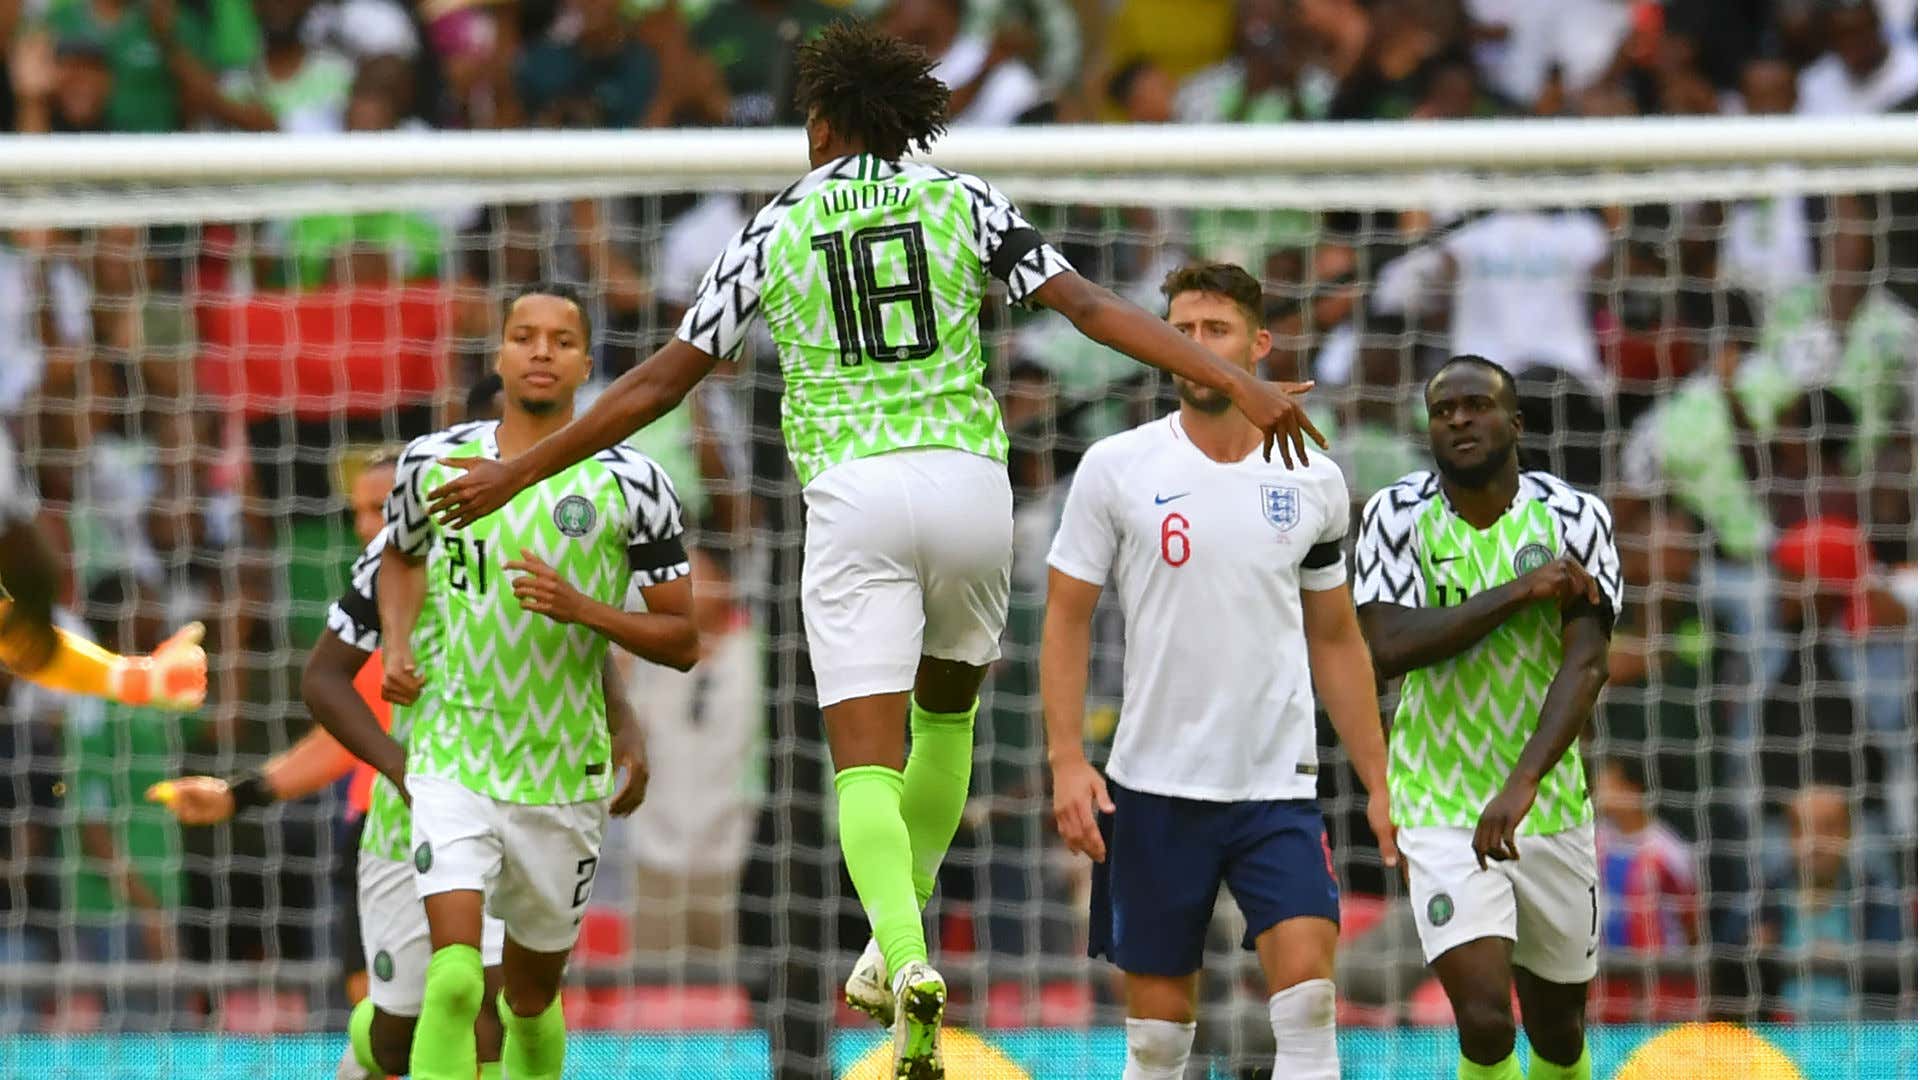 RELIVE Nigeria bow to England in World Cup warmup